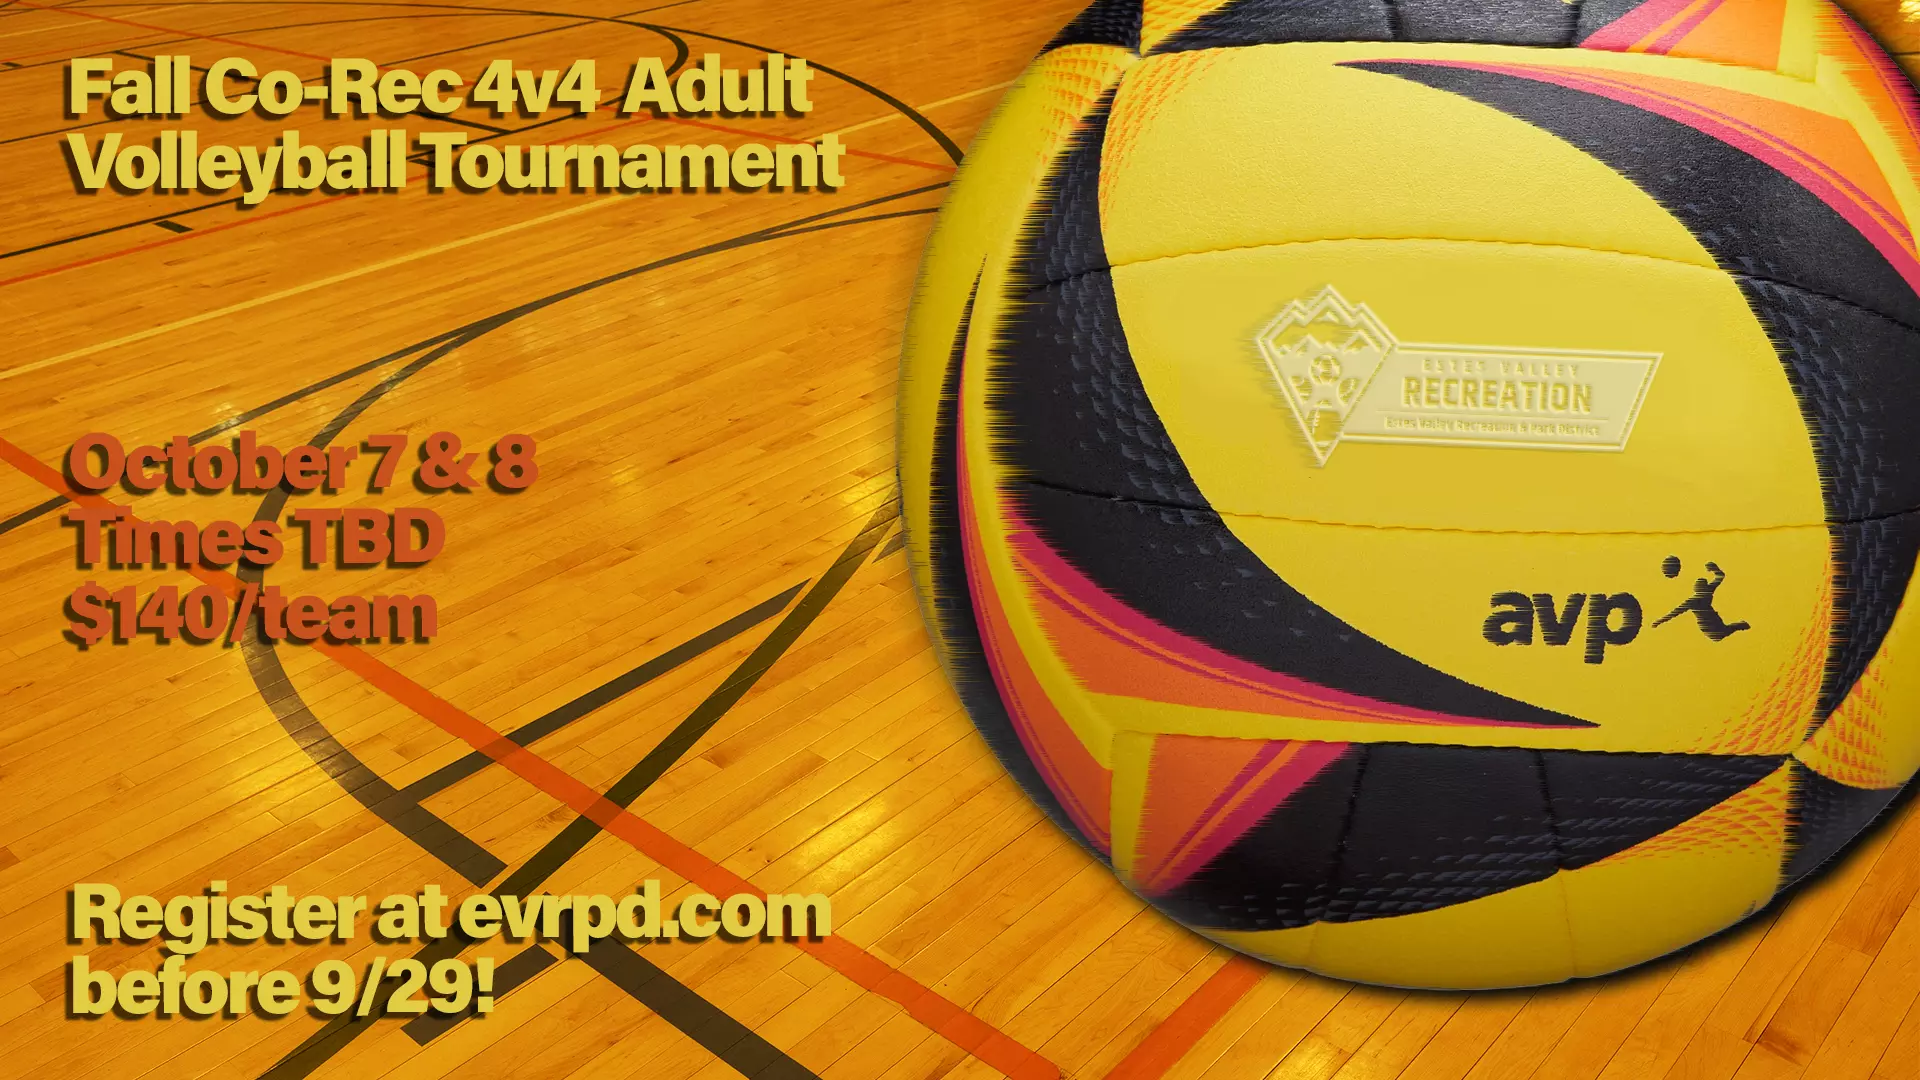 Fall Volleyball Tournament for ages 16+